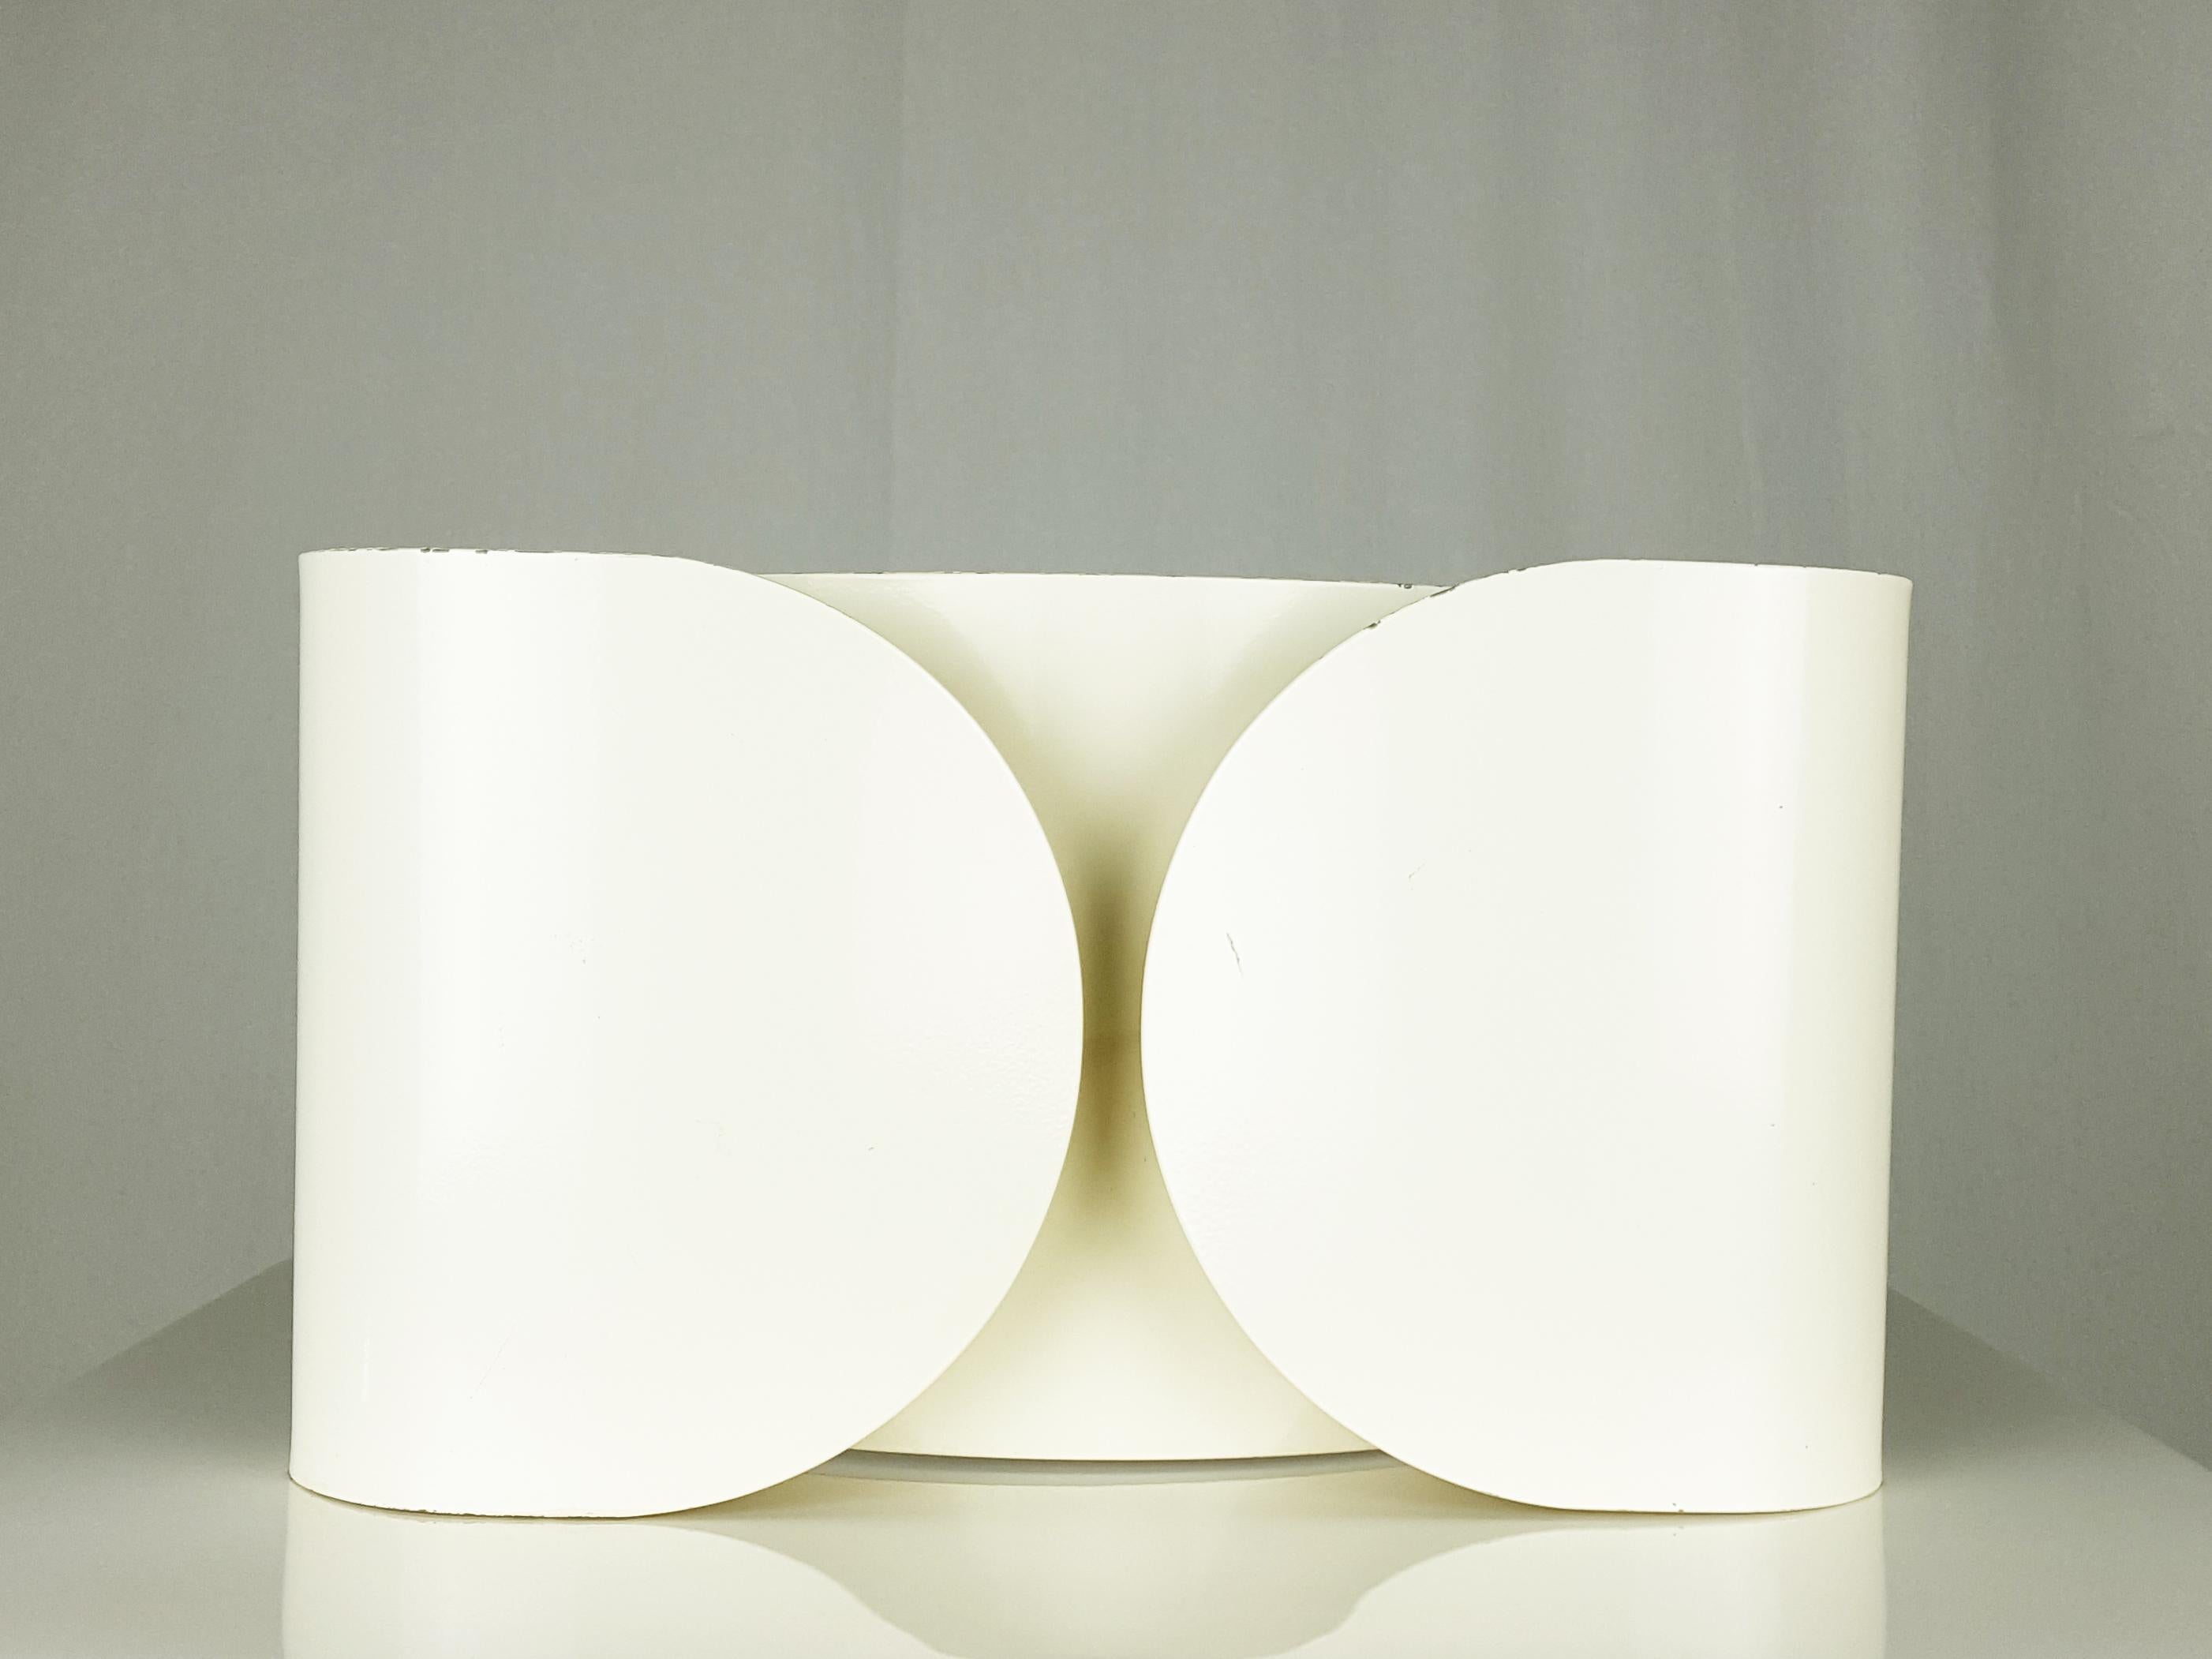 Space Age White Laquered Metal 2-Lights Sconce Foglio by Afra Tobia Scarpa for Flos, 1966 For Sale